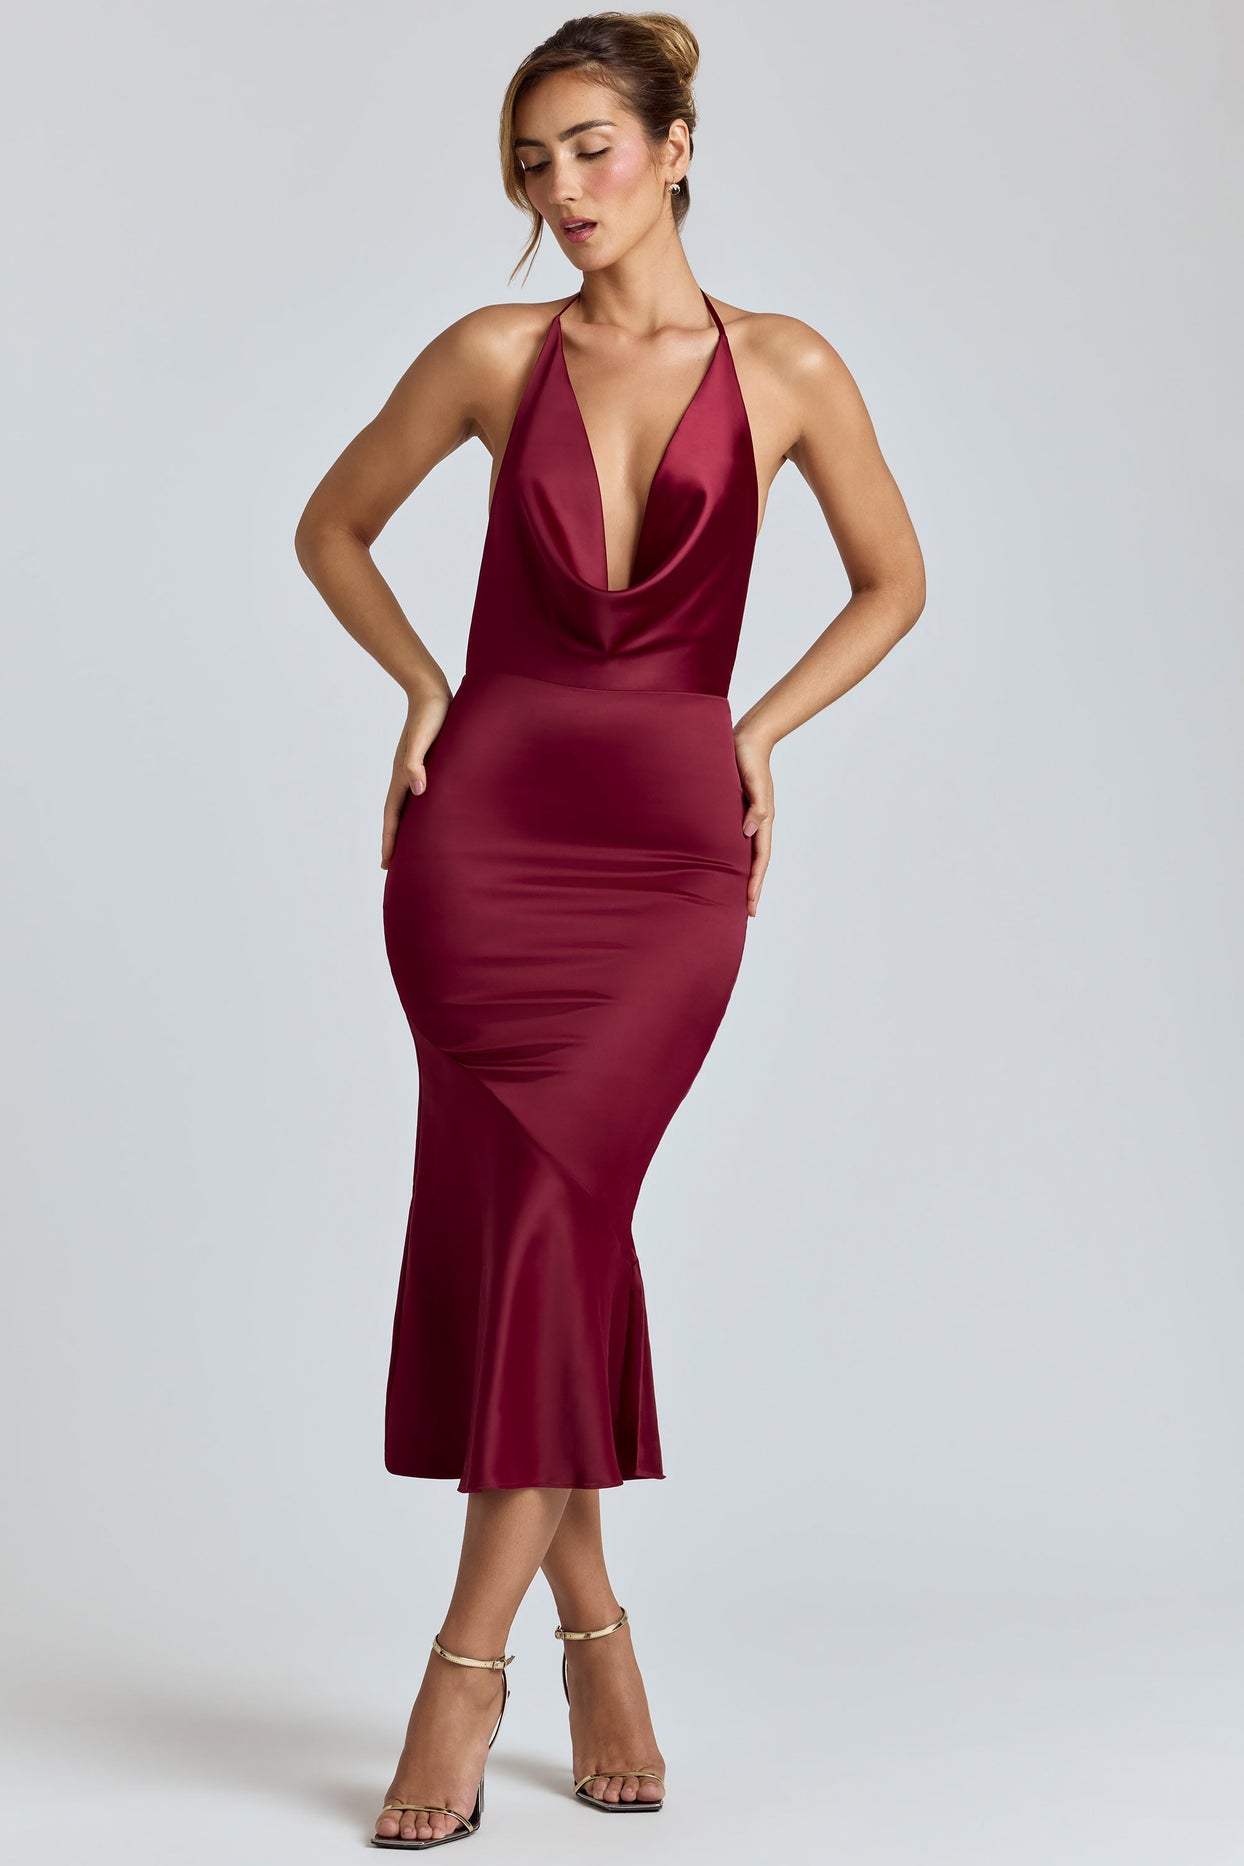 Red Burgundy Satin Corset Cowl Neck Maxi Prom Formal Dress with